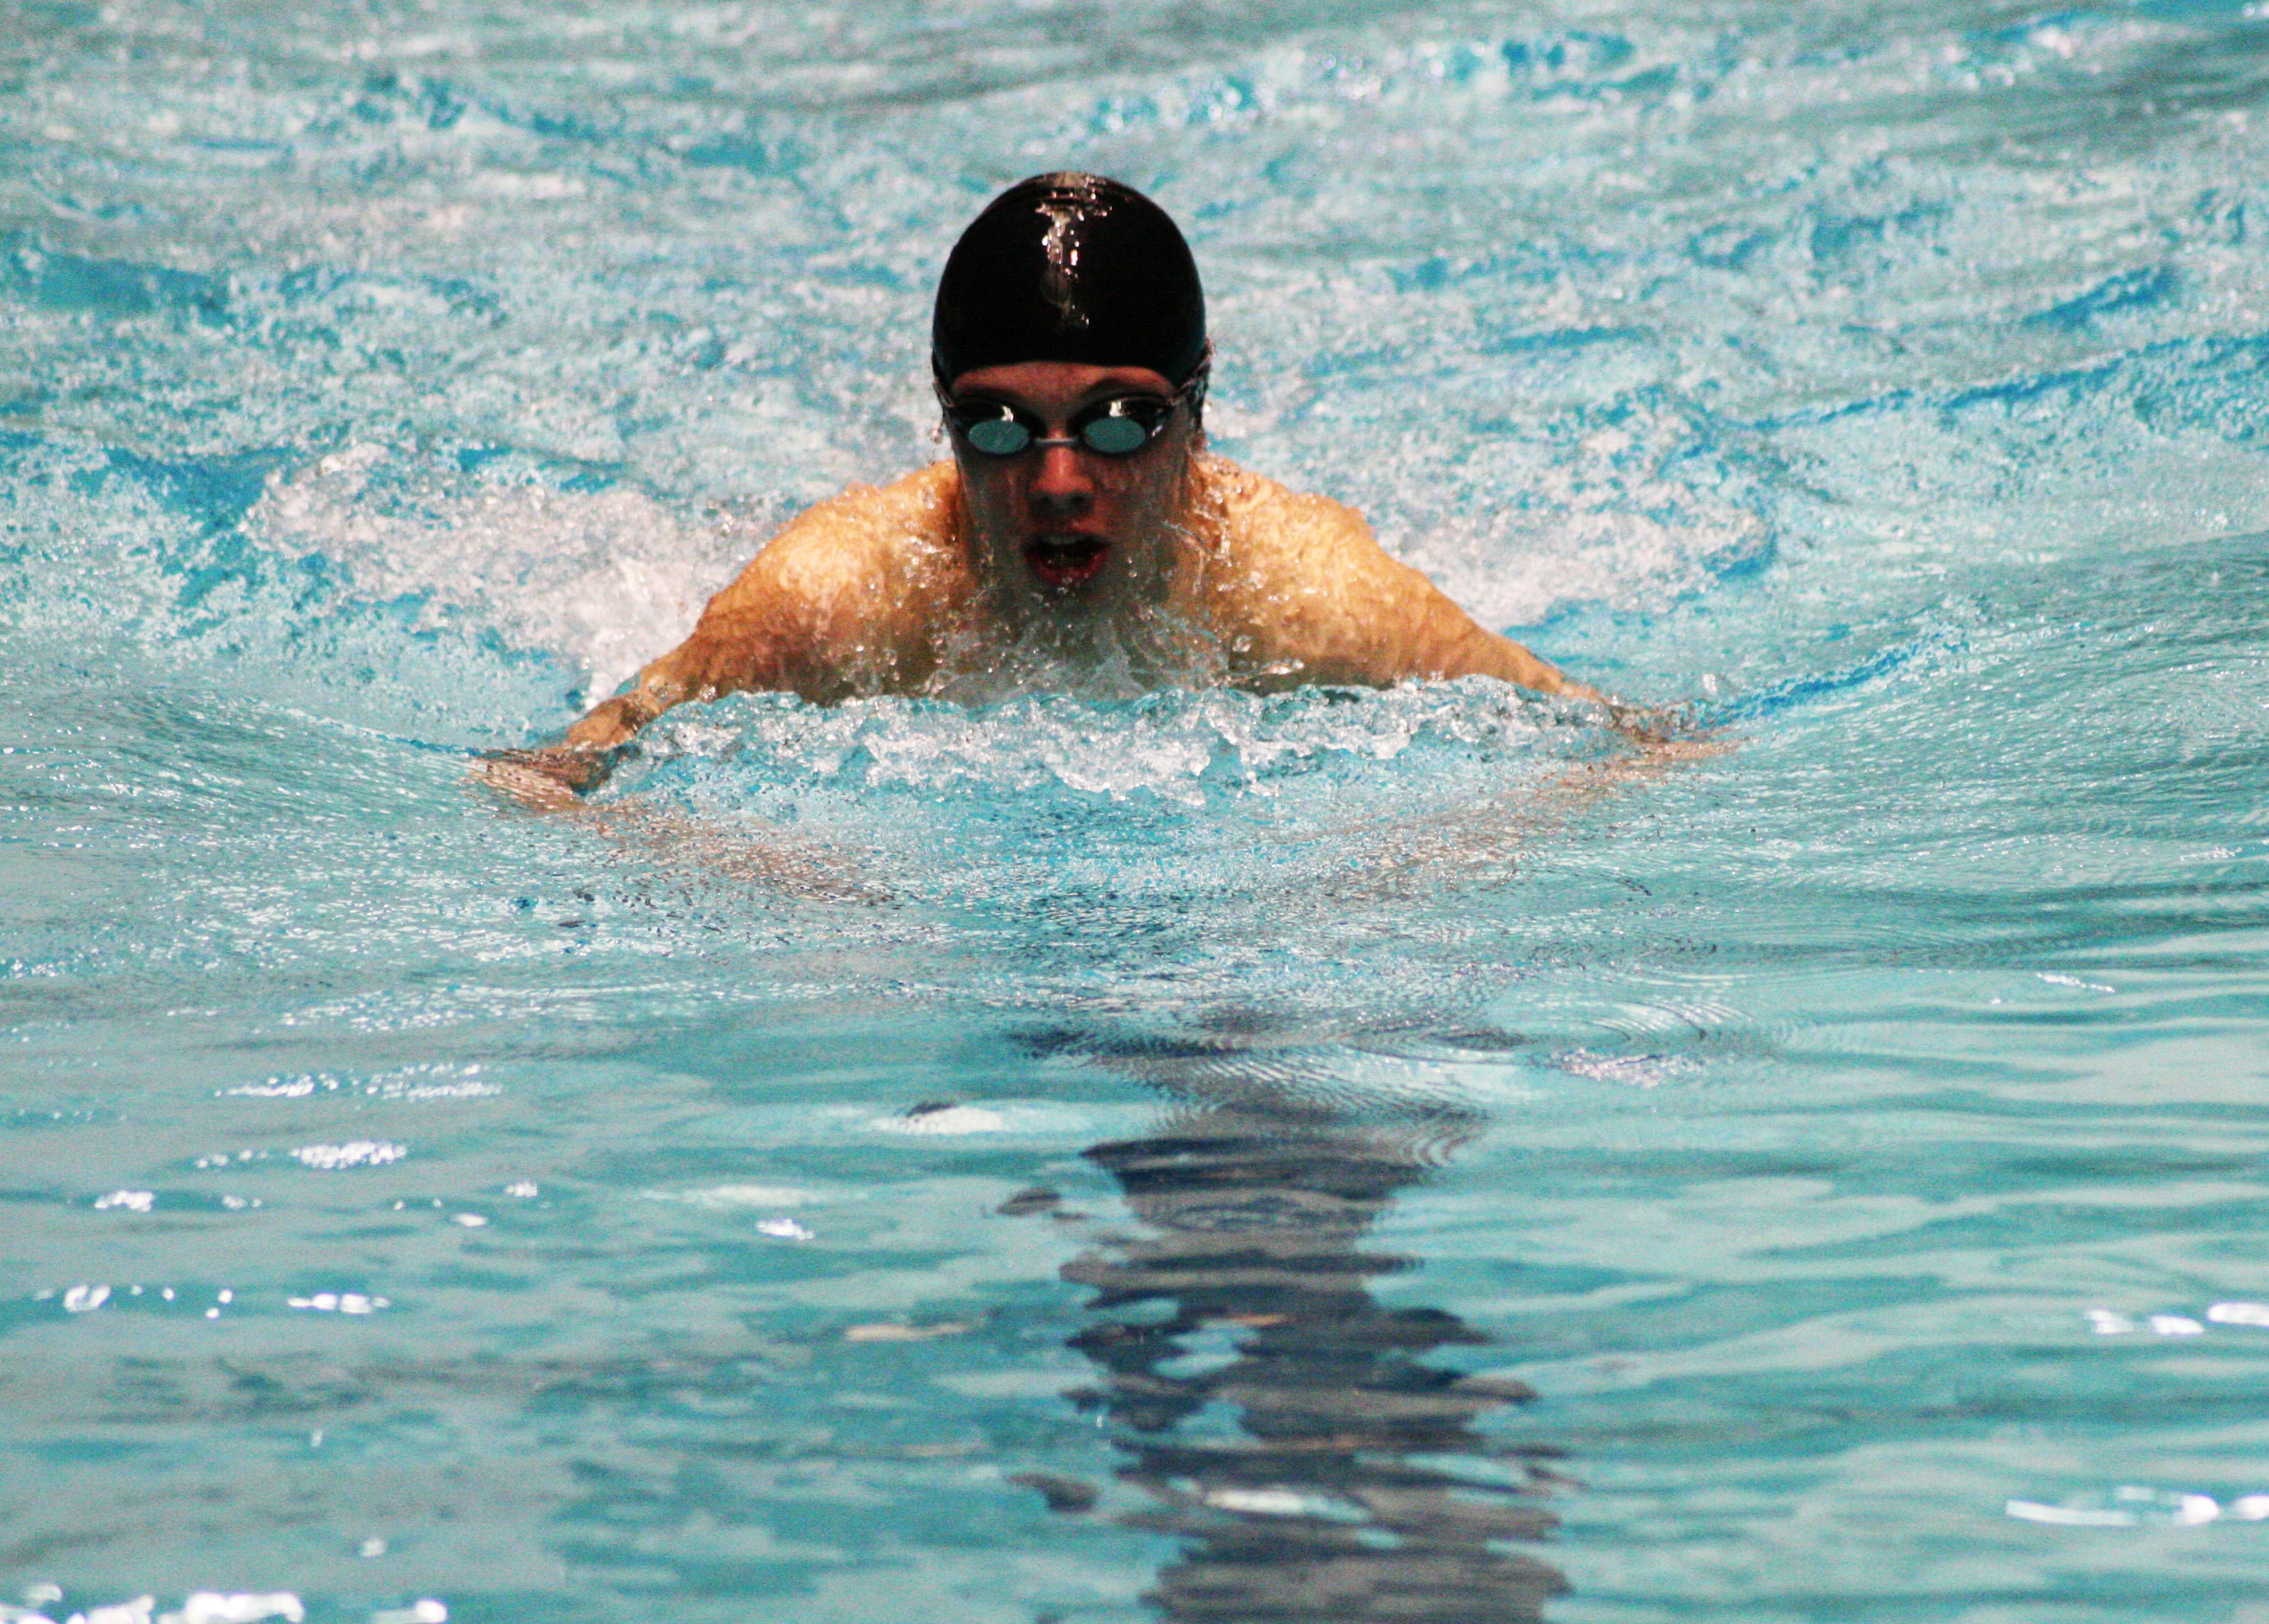 Kasey Calwell makes waves during the breaststroke portion of his 200 individual medley championship race.